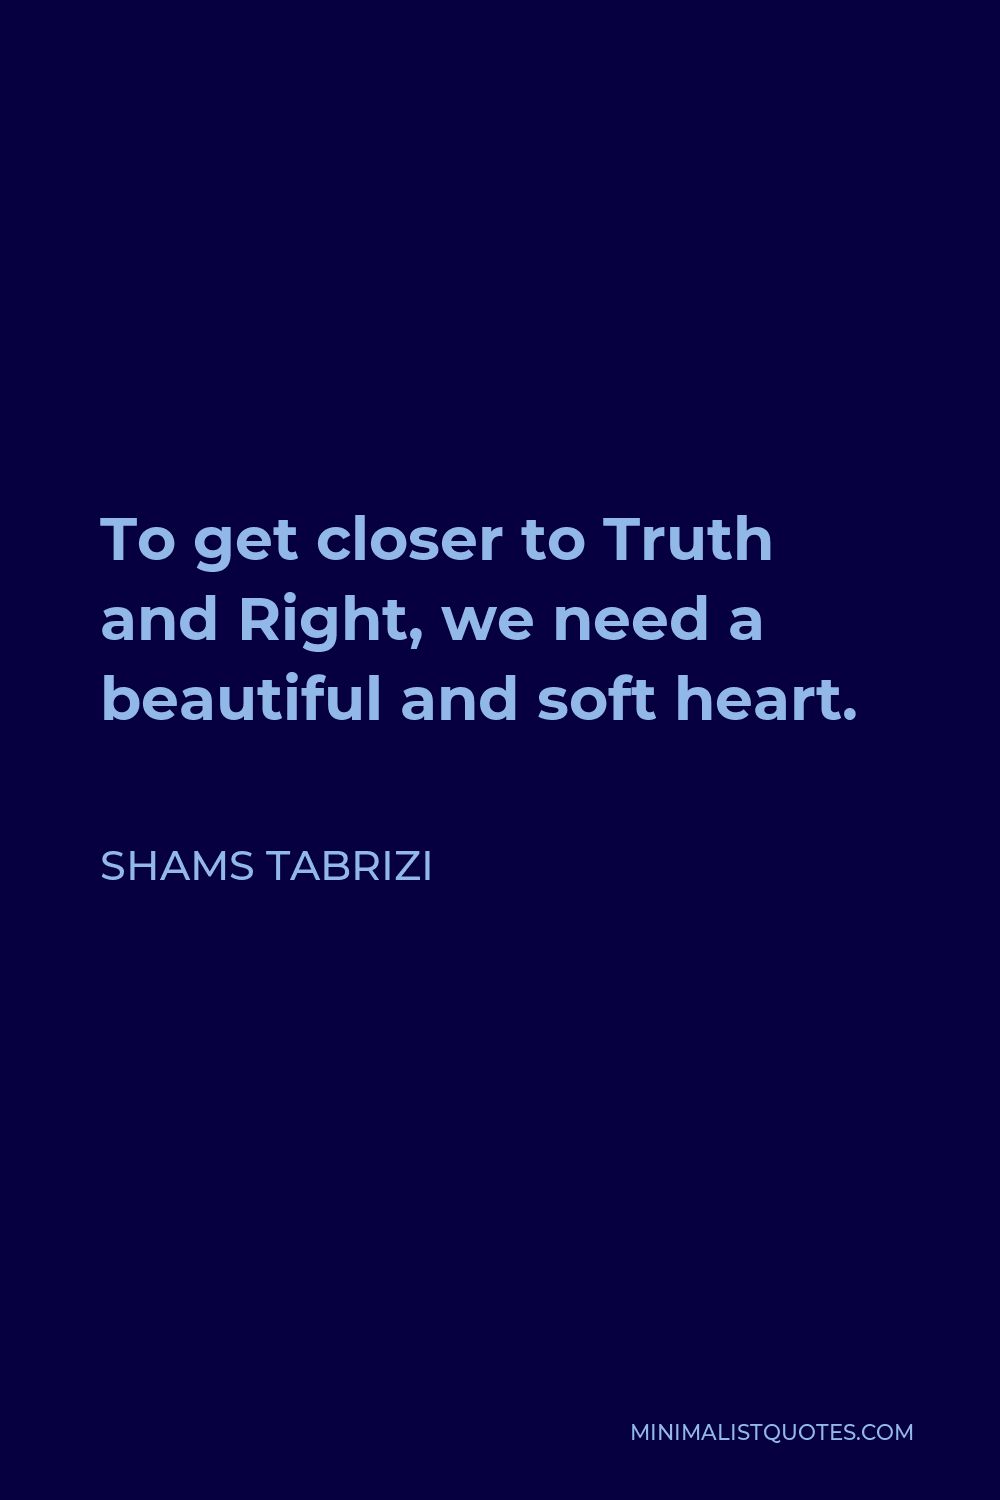 Shams Tabrizi Quote - To get closer to Truth and Right, we need a beautiful and soft heart.